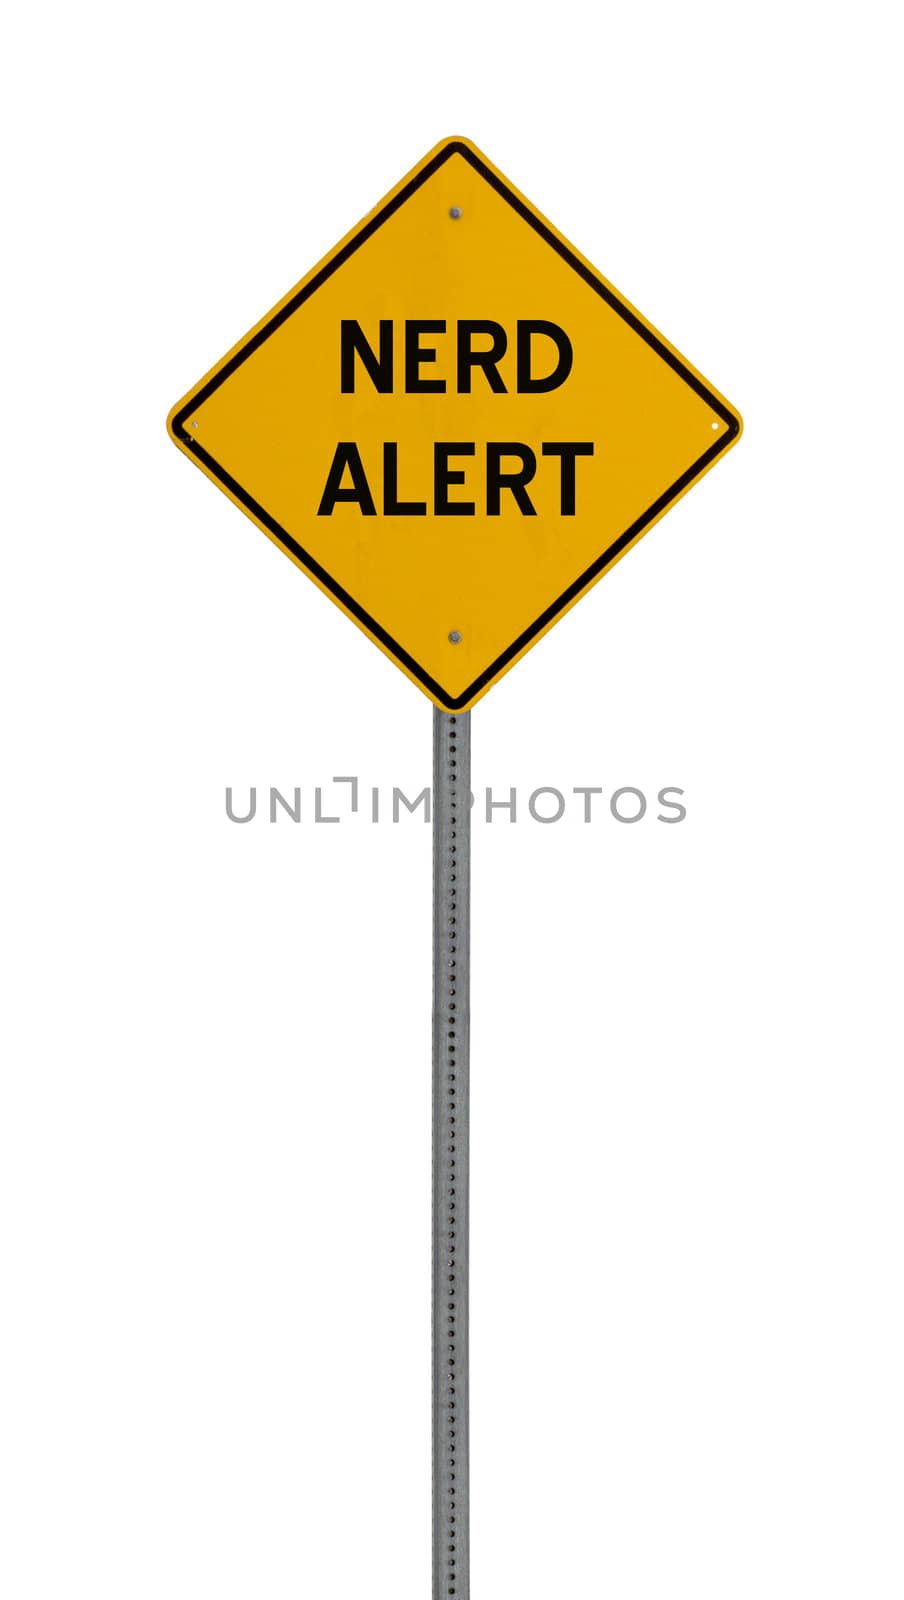 nerd alert - Yellow road warning sign by jeremywhat